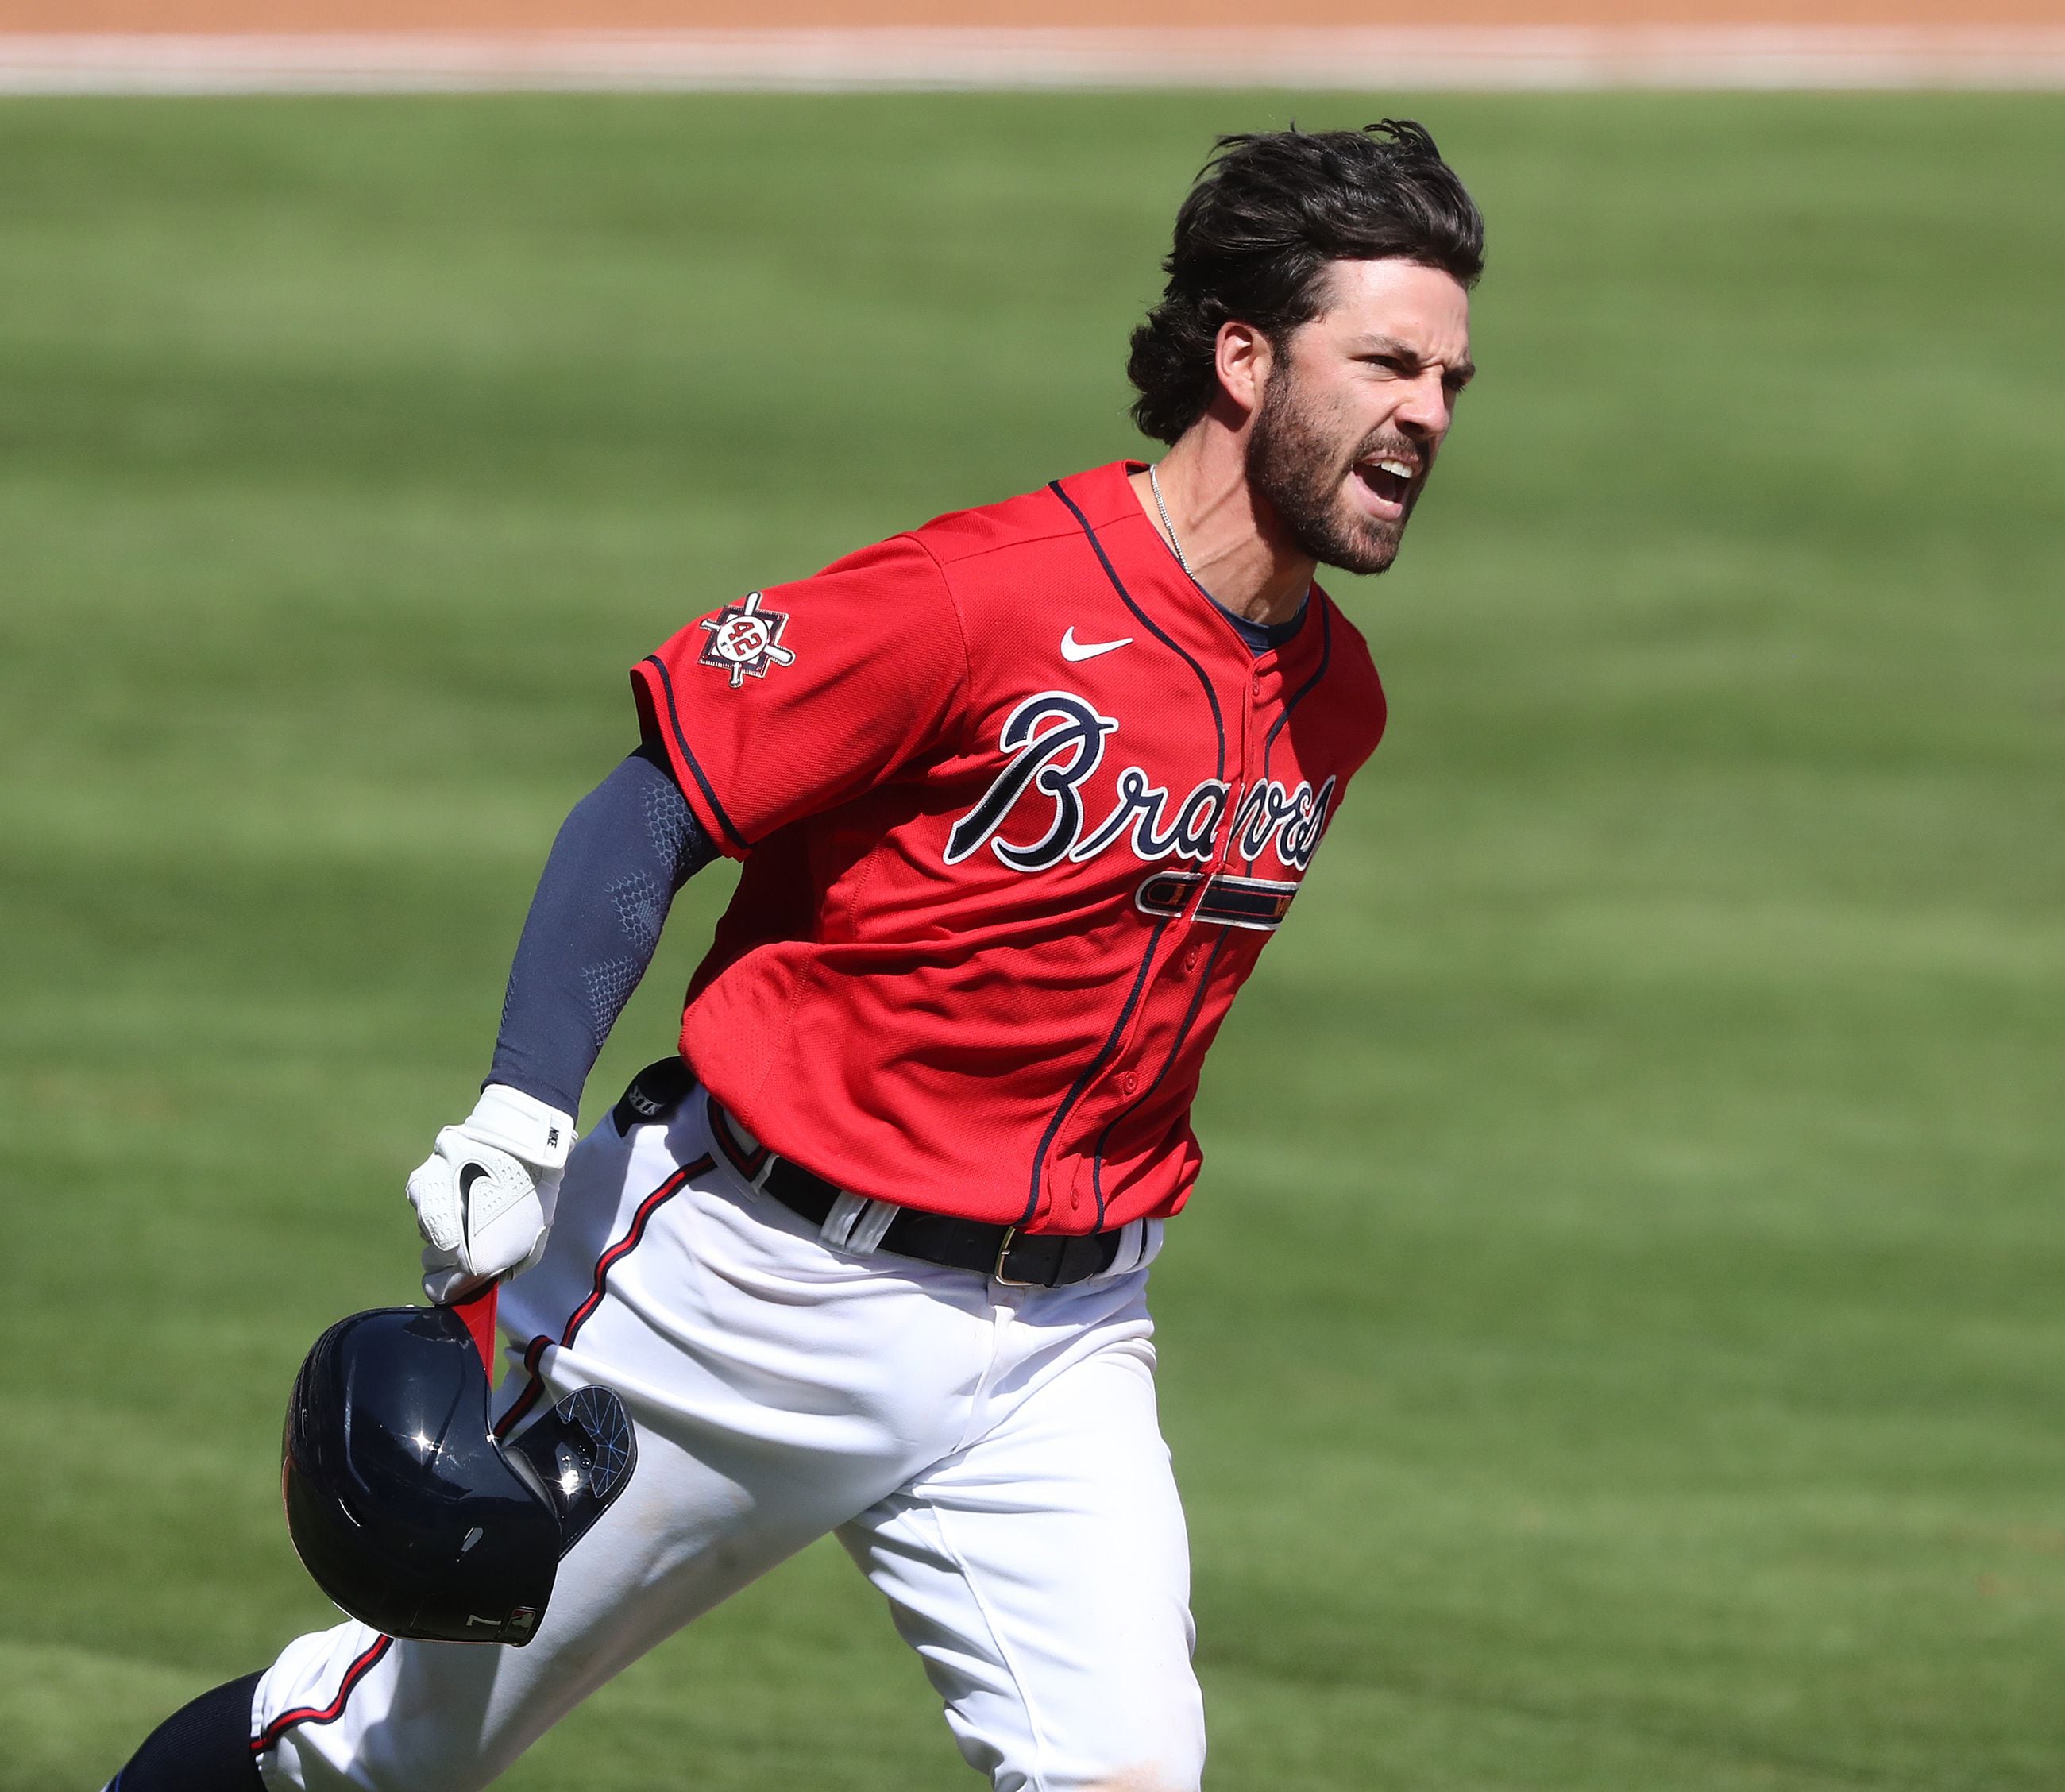 mancandy kings; — The thrilling saga of DANSBY SWANSON and his